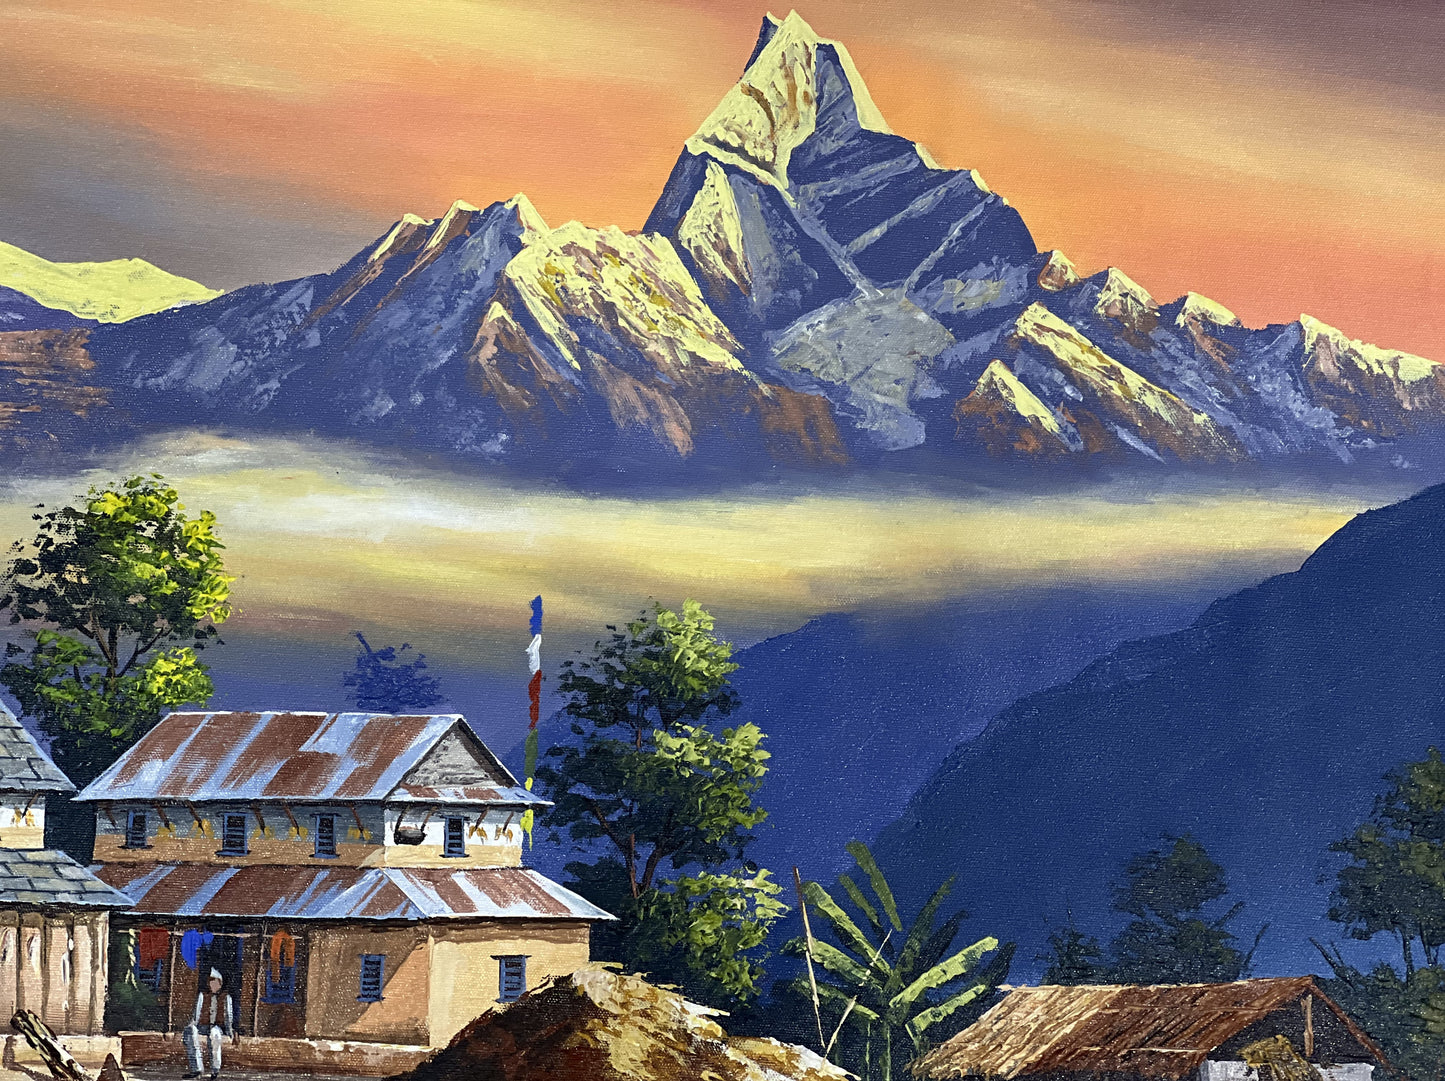 Mount Annapurna : A Majestic Vista from Dhampus Village / Acrylic Landscape Painting On Canvas/ High Quality Palette Knife Painting Sunrise View